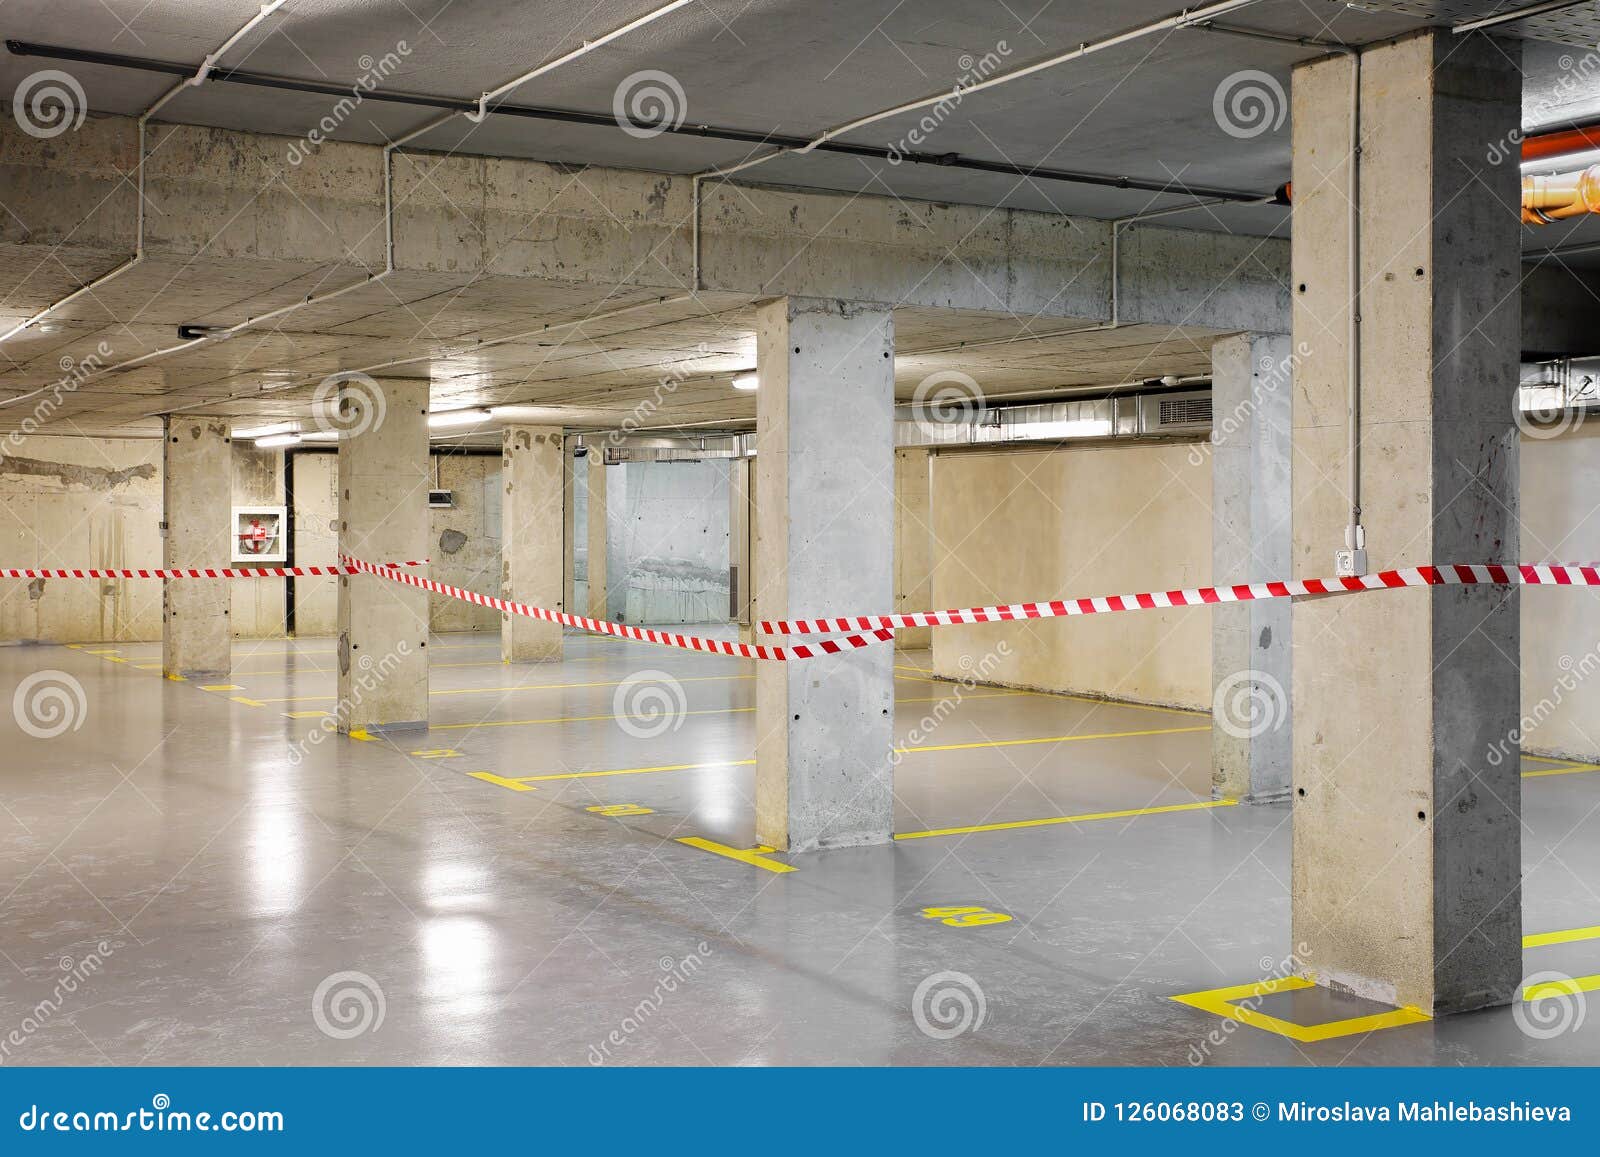 renewed underground car parking with yellow lot marking and warning tape